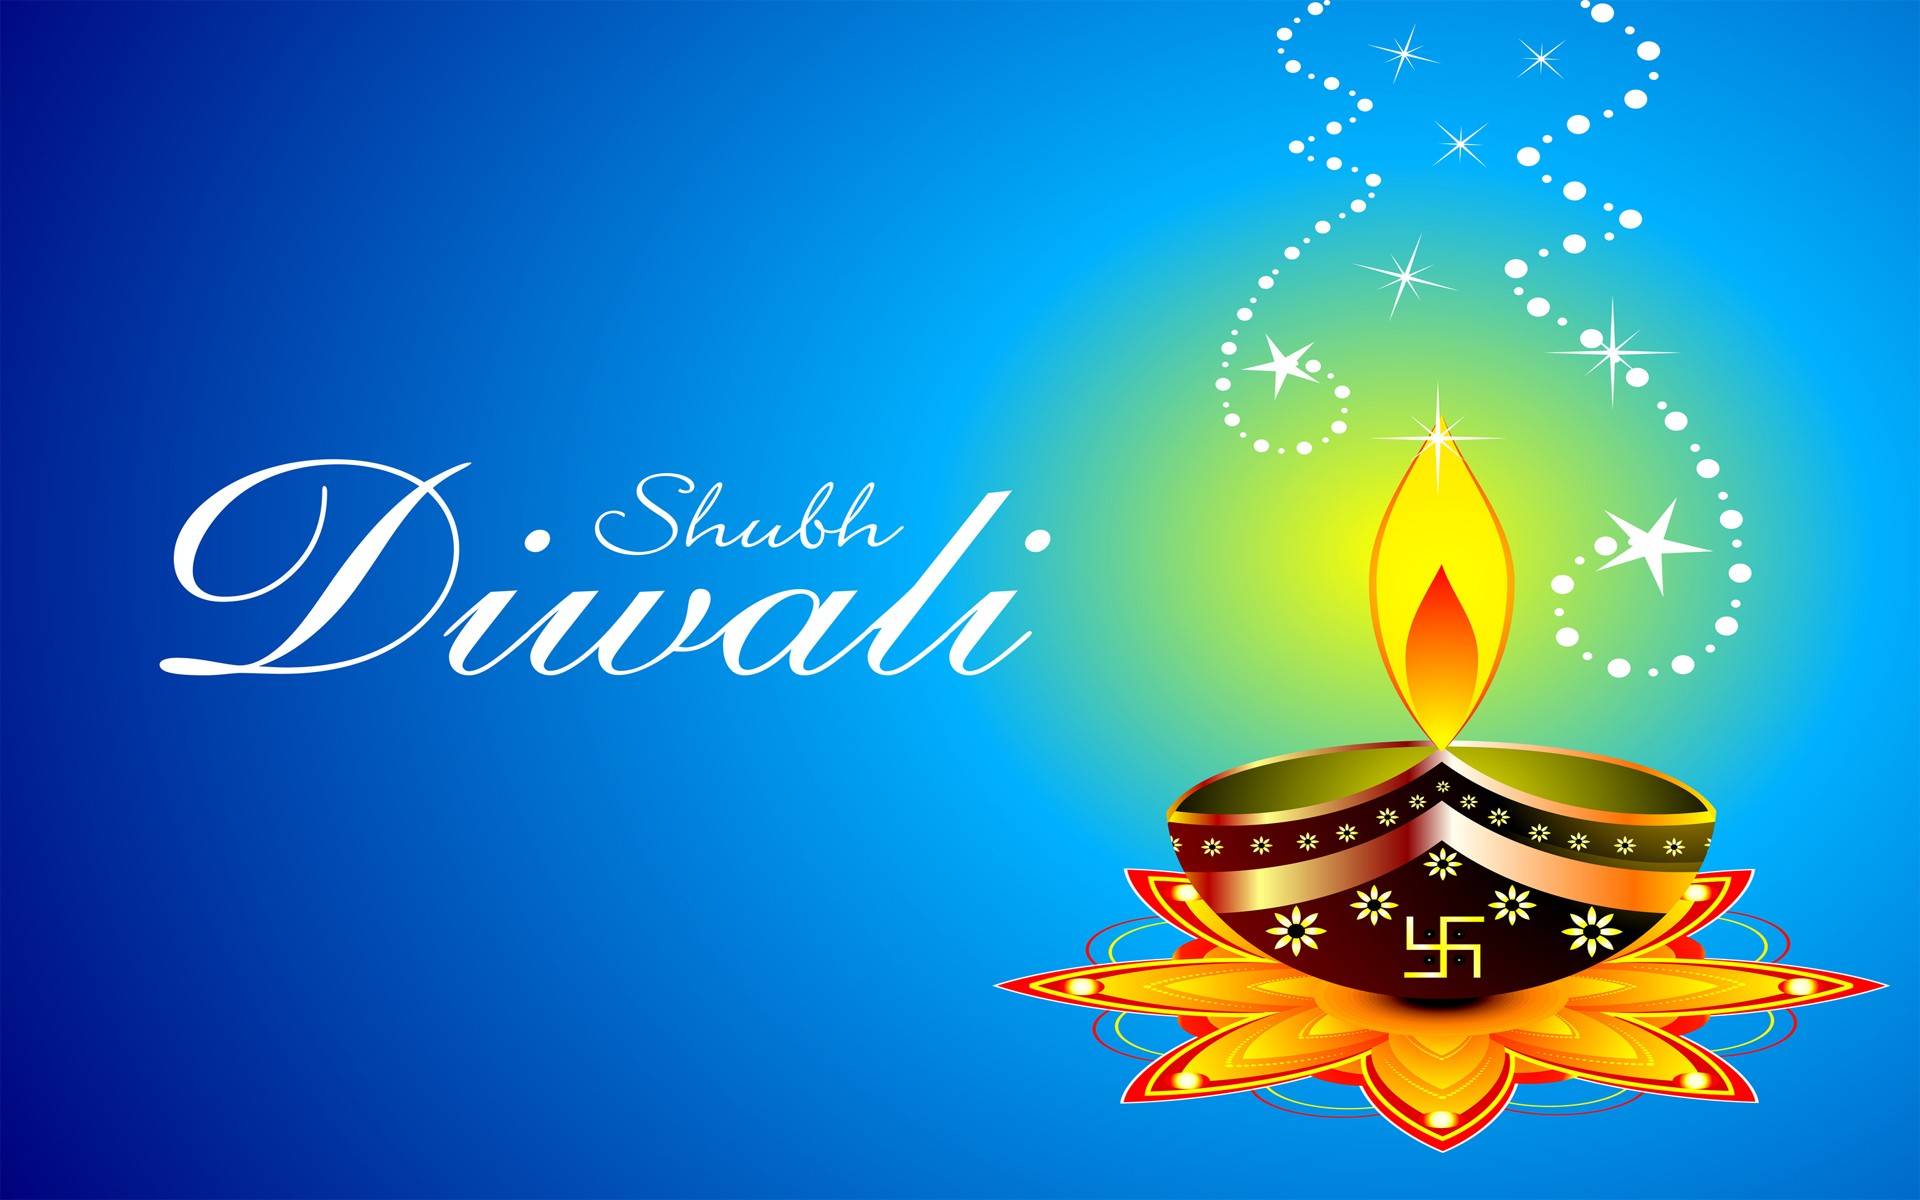 Happy Diwali Image, HD Wallpaper for Facebook and Whatsapp Celebrat, Daily Celebrations Ideas, Holidays & Festivals